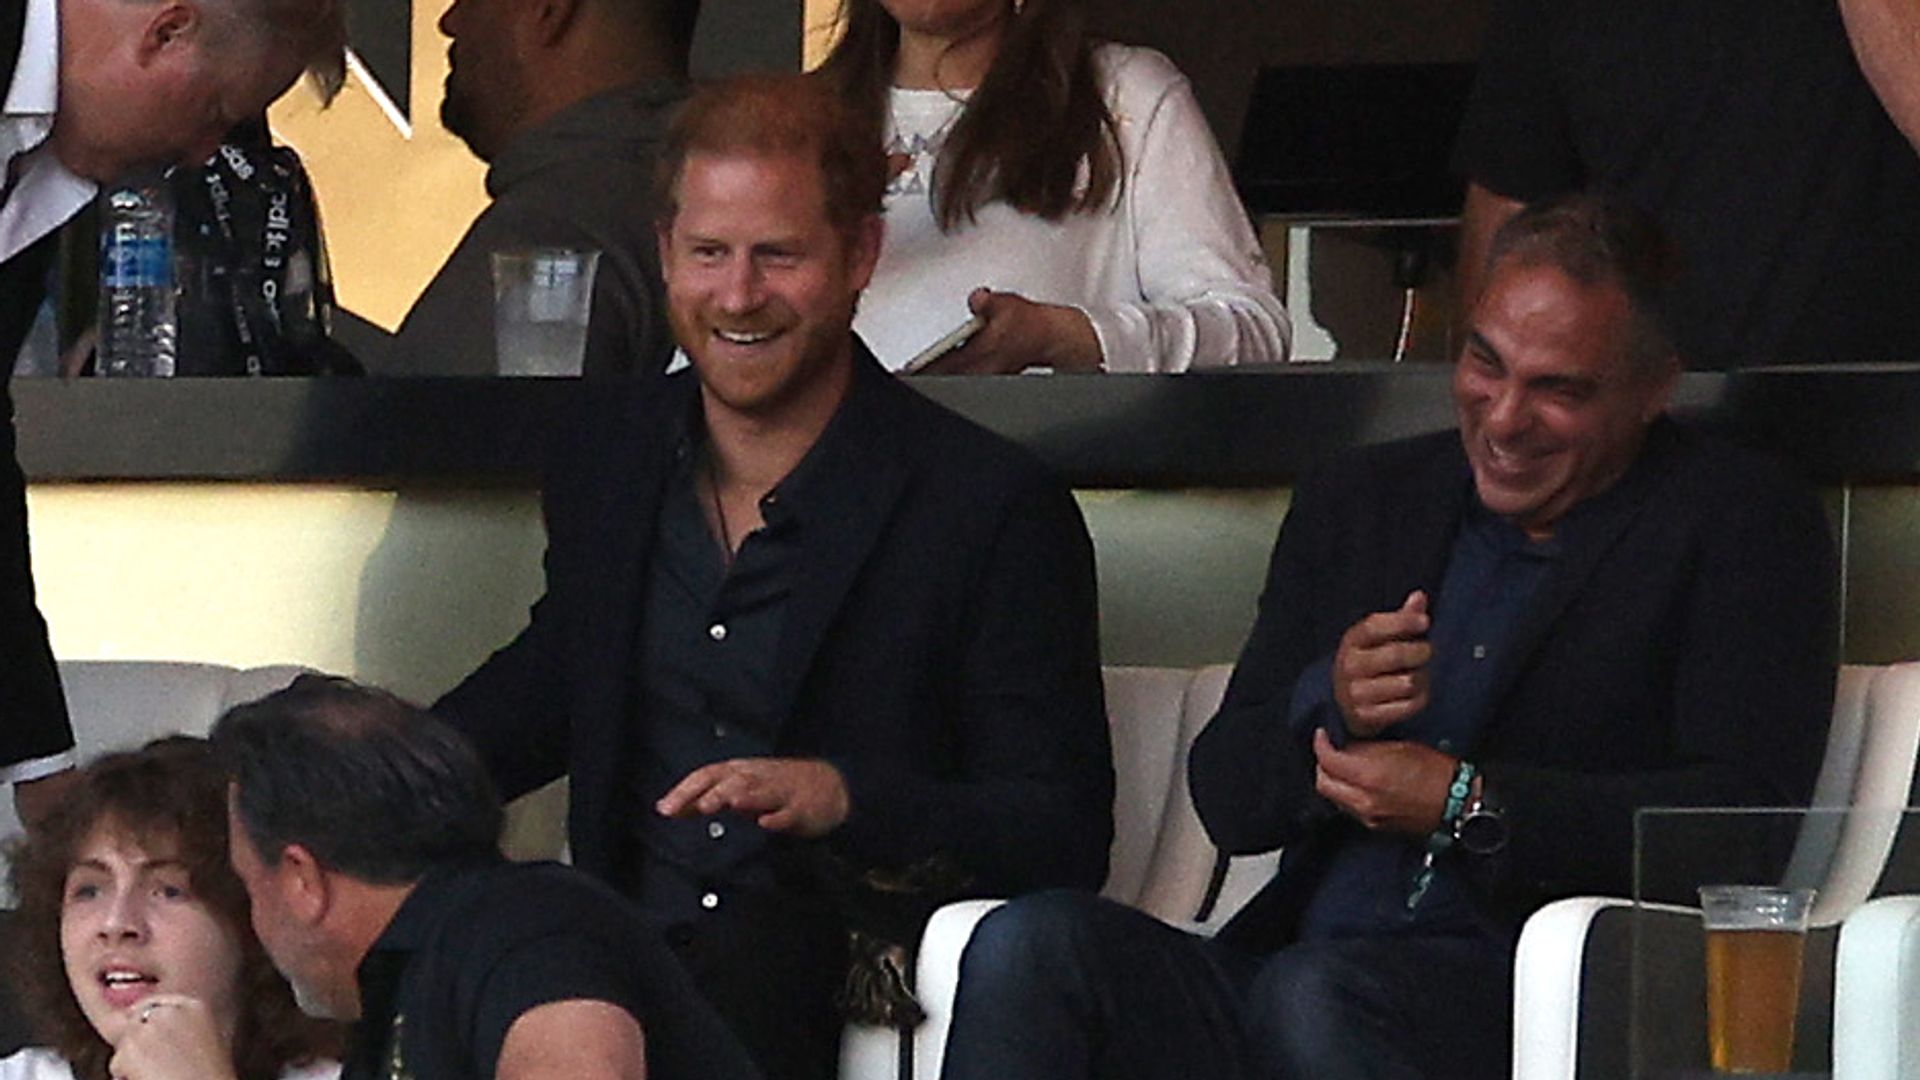 Prince Harry supports David Beckham's football team as Meghan Markle misses out despite invite